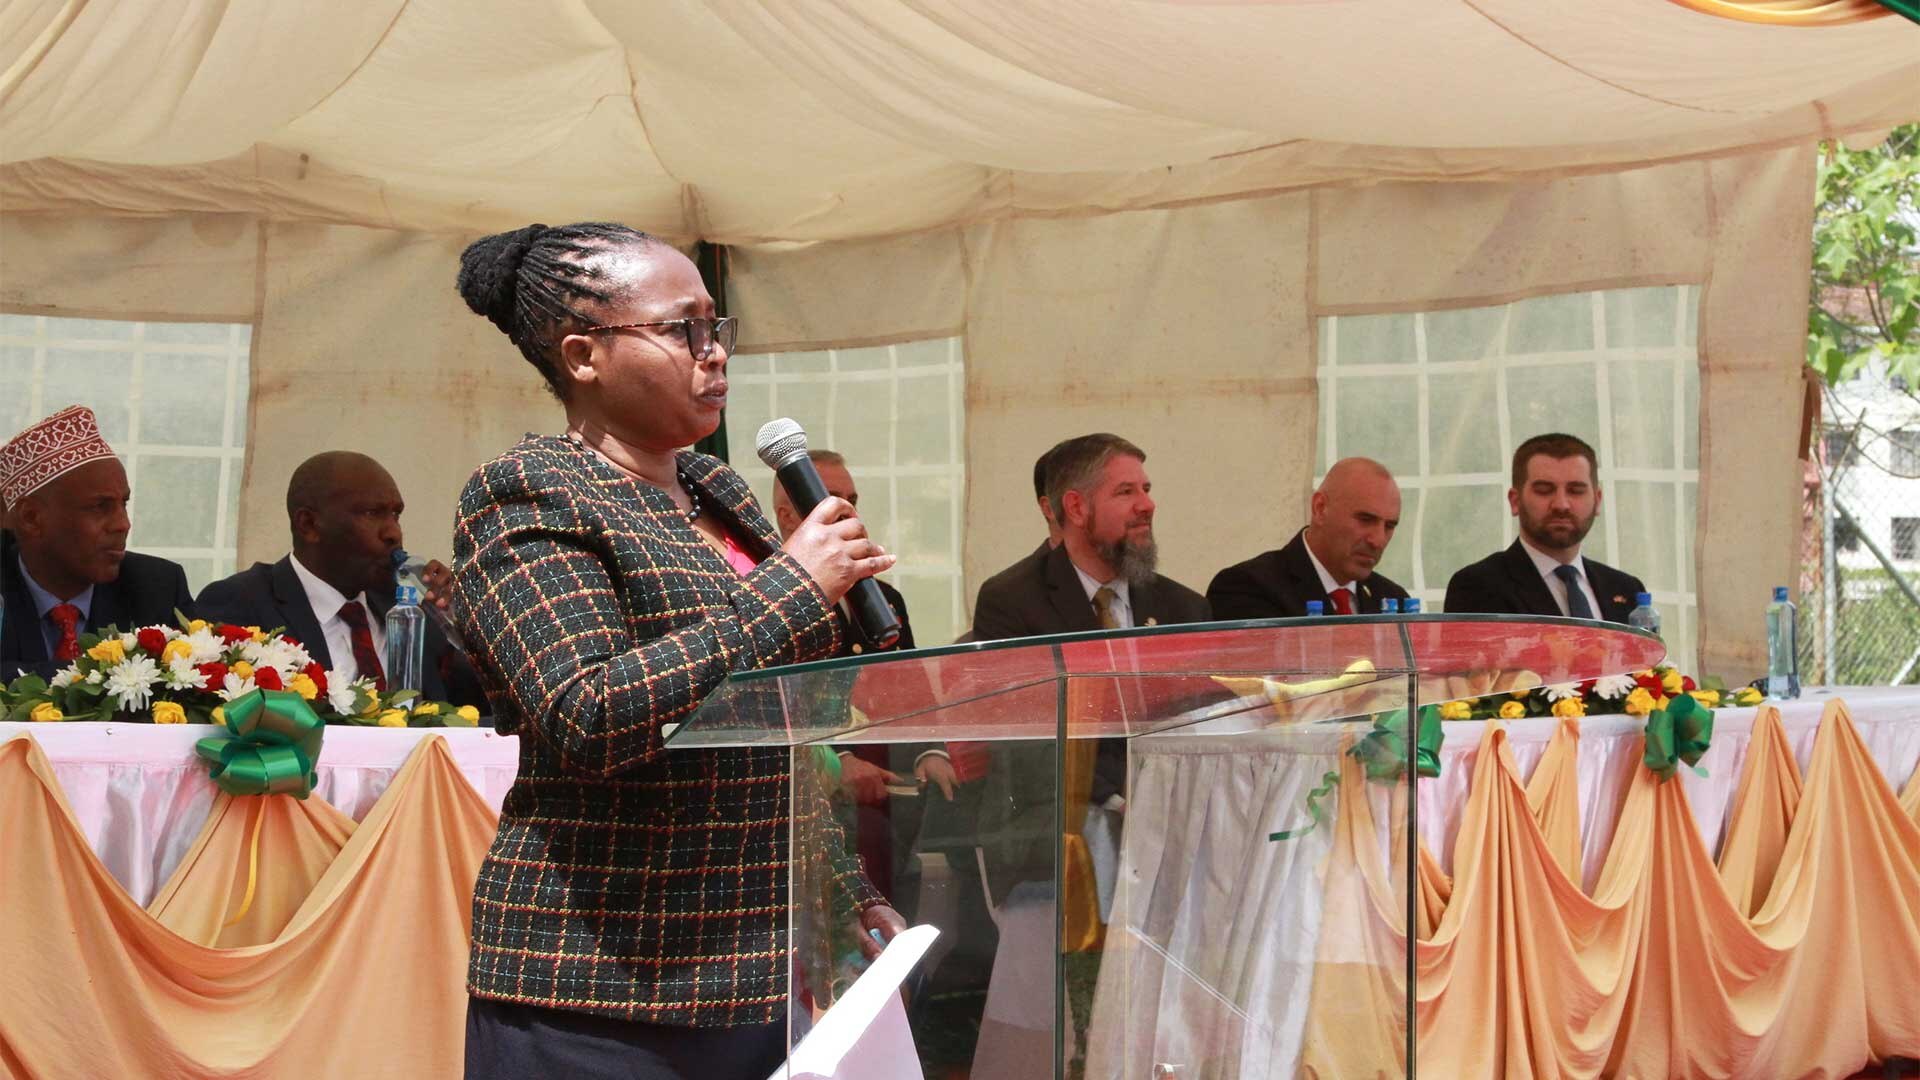 Members of the Defense Threat Reduction Agency (DTRA) recently participated in a ribbon-cutting ceremony at the Kenya Veterinary Vaccine Production Institute (KEVEVAPI) to celebrate the completed upgrades of the Effluent Treatment System (ETS) Dec. 7, in Nairobi, Kenya. (Pictured is Dr. Pope, director of Cooperative Threat Reduction program at DTRA, speaking at the ceremony)